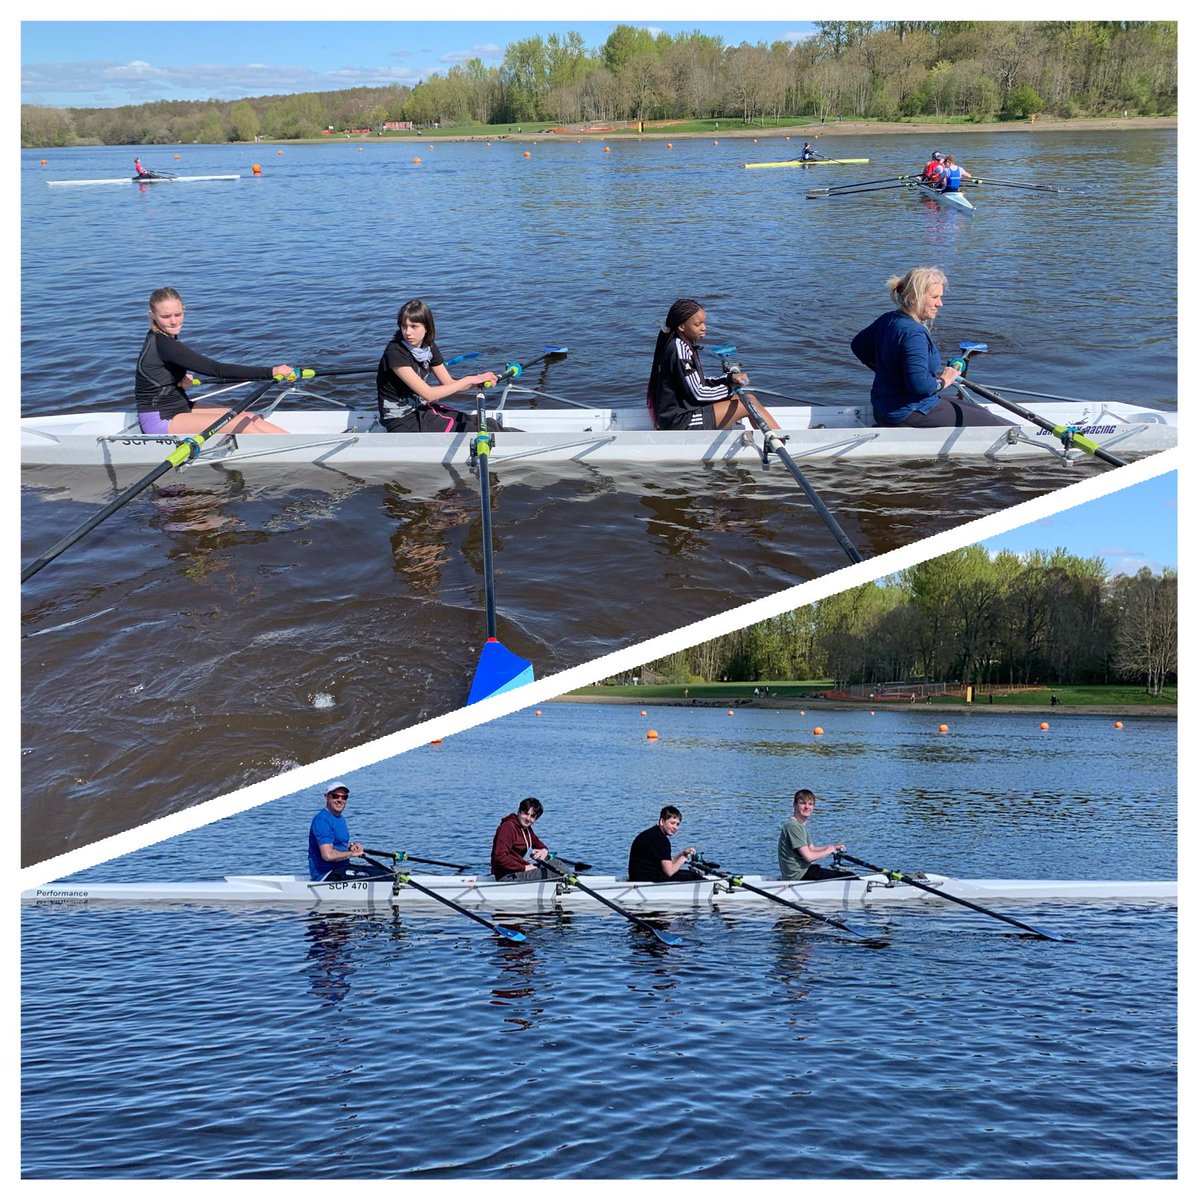 We were delighted to welcome 5 of our recent #CommunityRowing participants from @OLHSMotherwell to our junior squad development session this morning. Great work by all our very talented local young athletes. @SP_RC1 @NLActiveSchools @ScottishRowing @active_nl